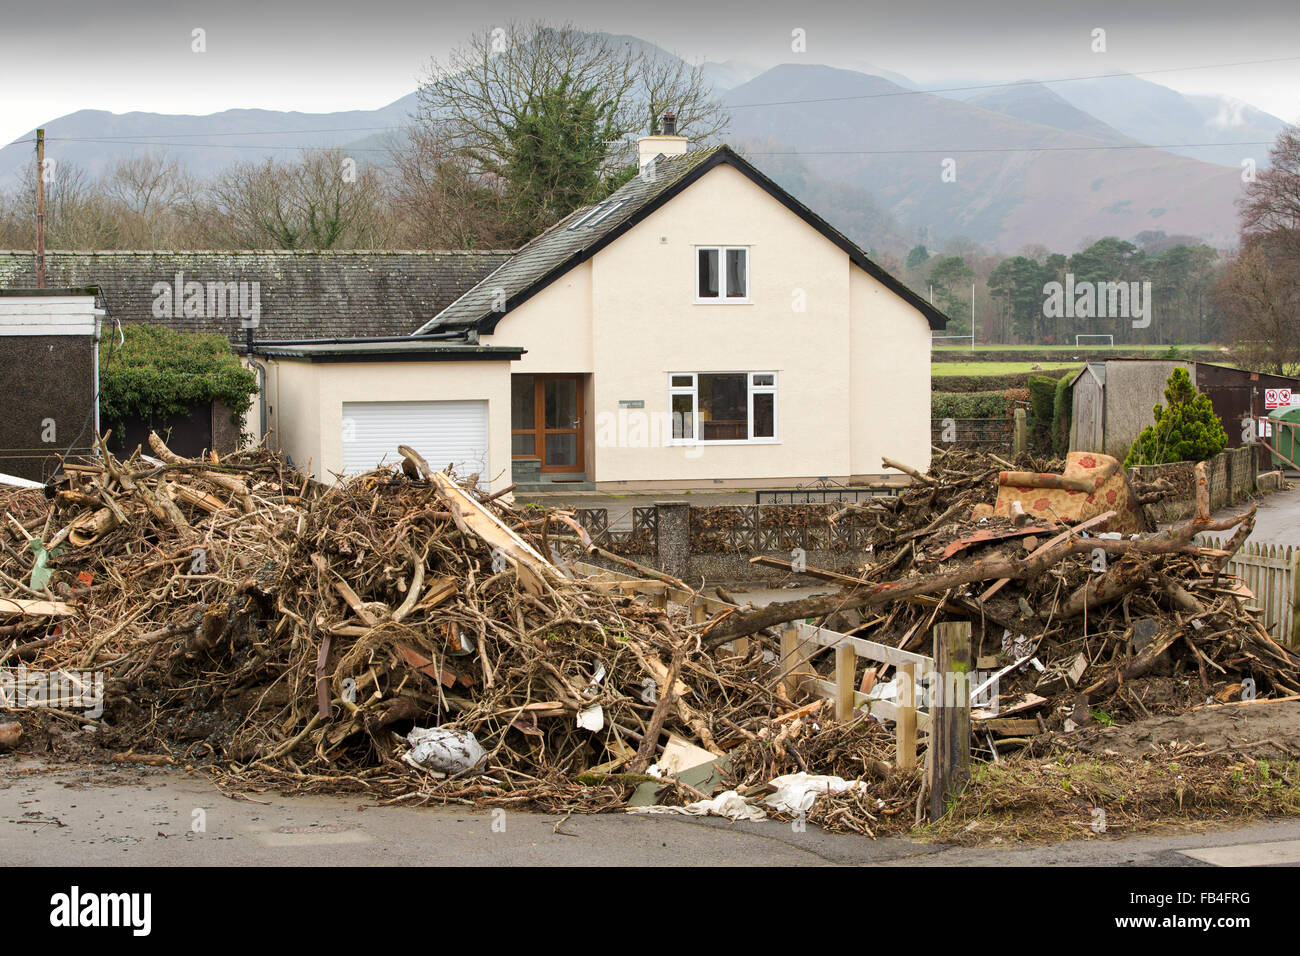 On Saturday 5th December 2015, Storm desmond crashed into the UK, producing the UK's highest ever 24 hour rainfall total at 341.4mm. It flooded many towns including Keswick. This shots shows piles of flood debris in Keswick from the flooding River Greta, which overtopped the new flood defences, built after the 2009 floods. Stock Photo